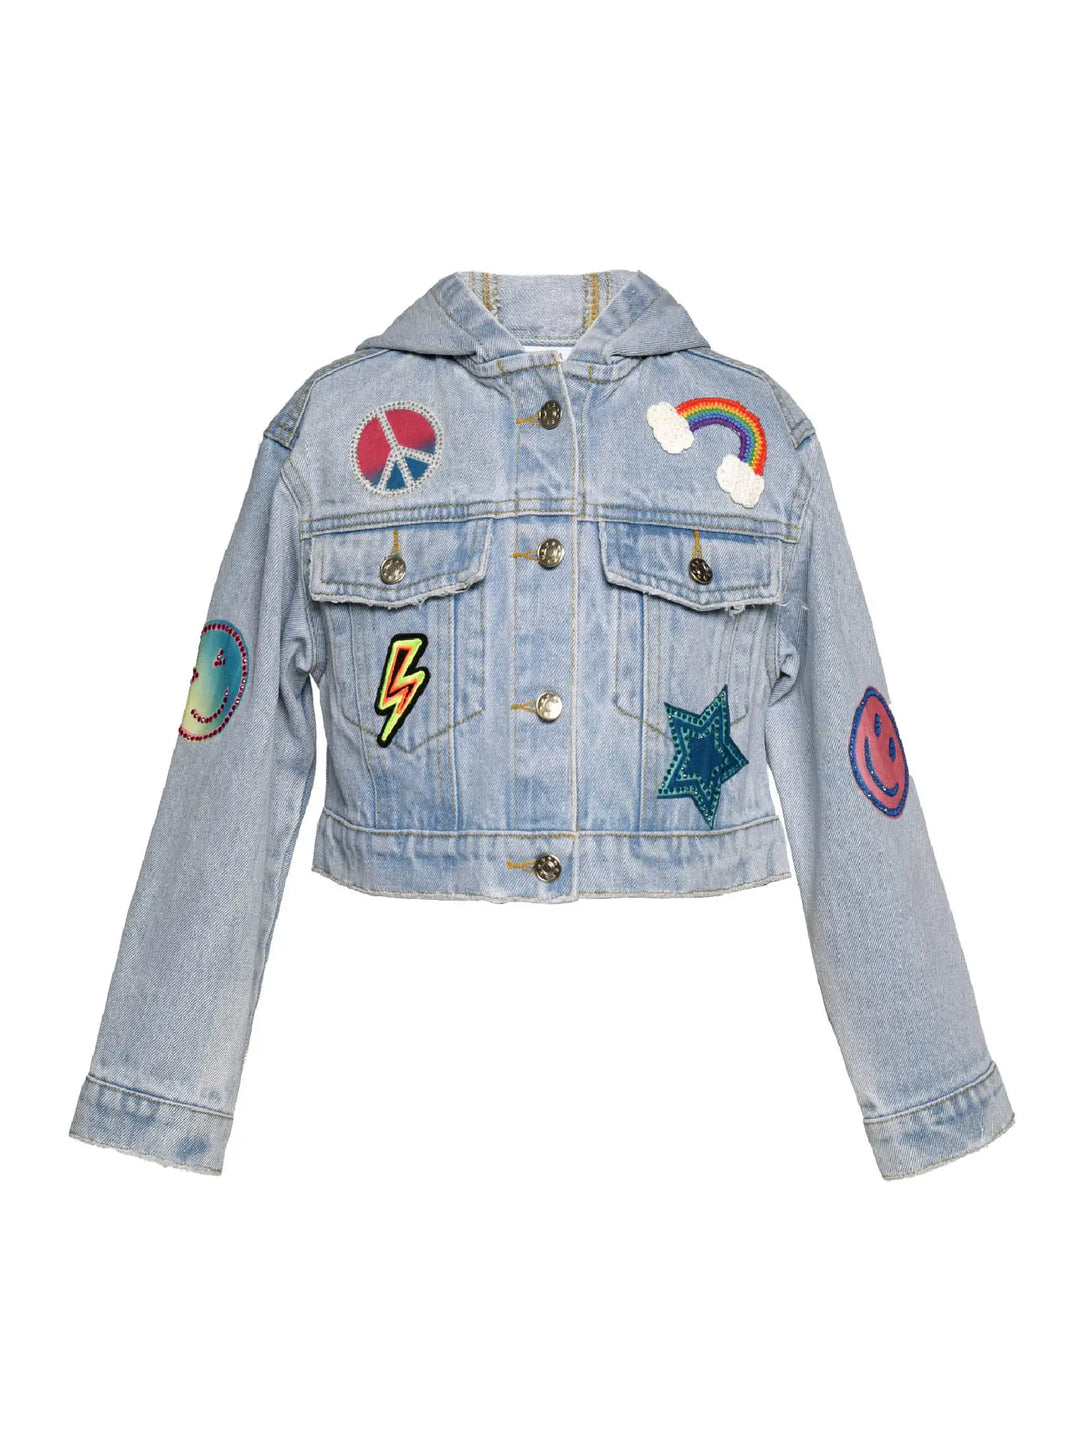 Vintage Denim Jacket with Patches